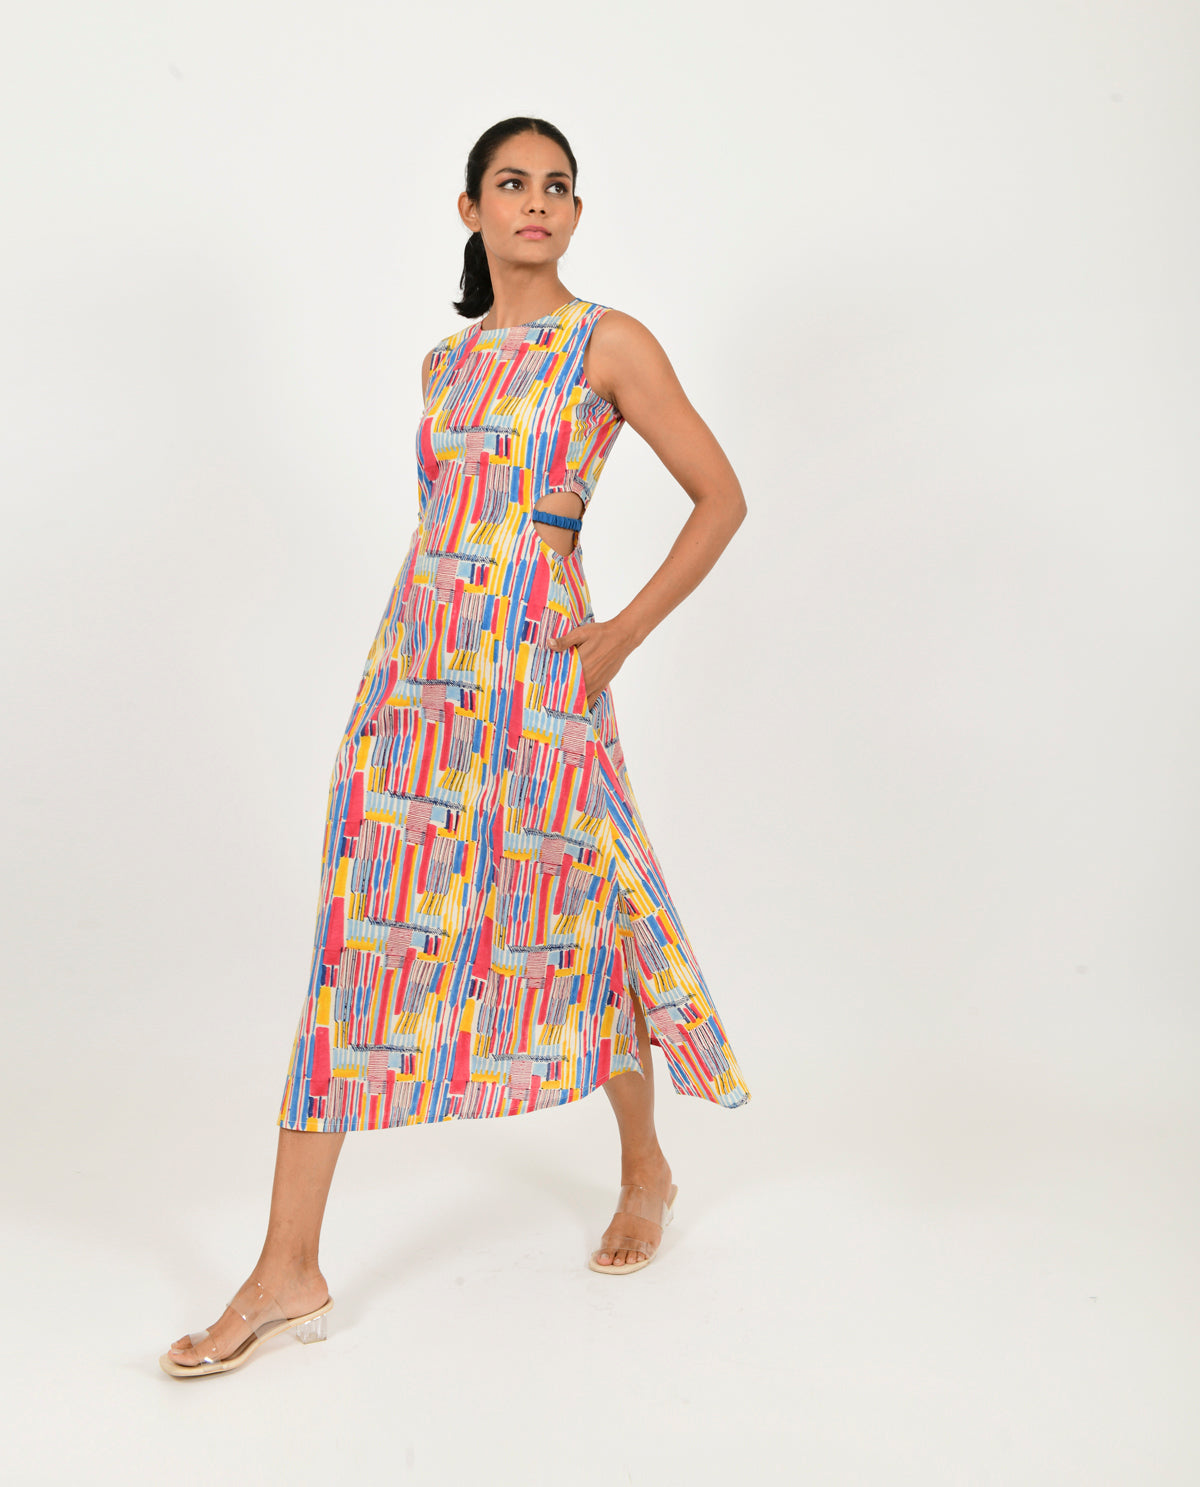 Multicolor Side Cut Dress at Kamakhyaa by Rias Jaipur. This item is Block Prints, Casual Wear, Linen Blend, Midi Dresses, Multicolor, Natural, Regular Fit, Scribble Prints, Sleeveless Dresses, Womenswear, Yaadein